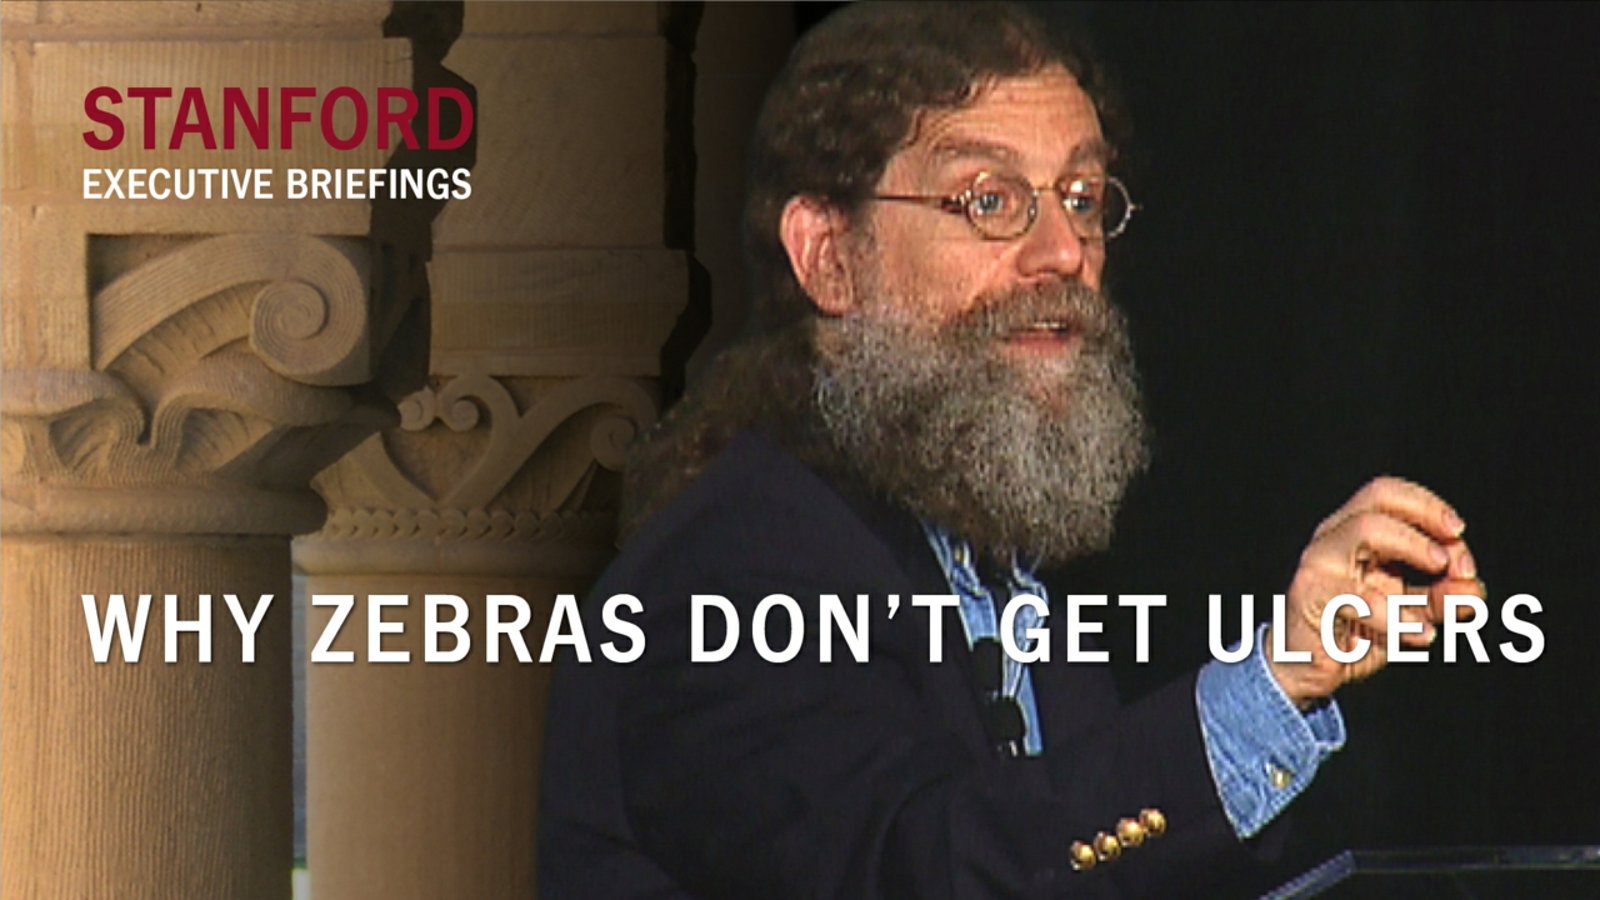 Why Zebras Don't Get Ulcers - With Robert Sapolsky